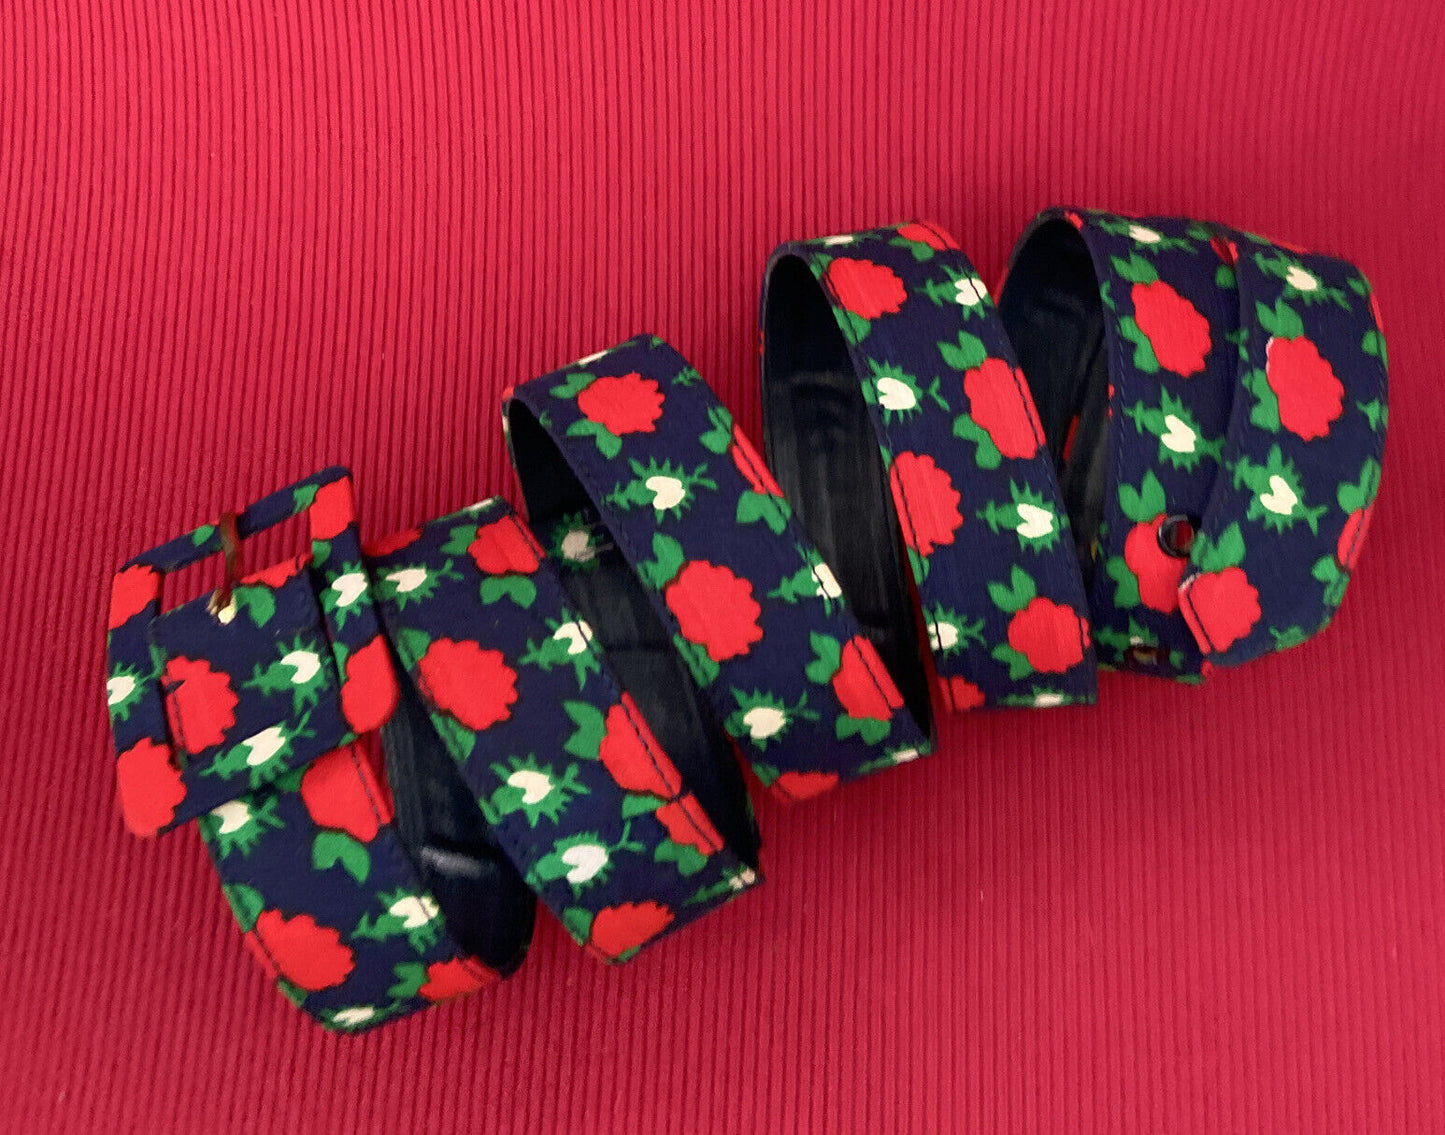 Women's Belt With Floral Pattern